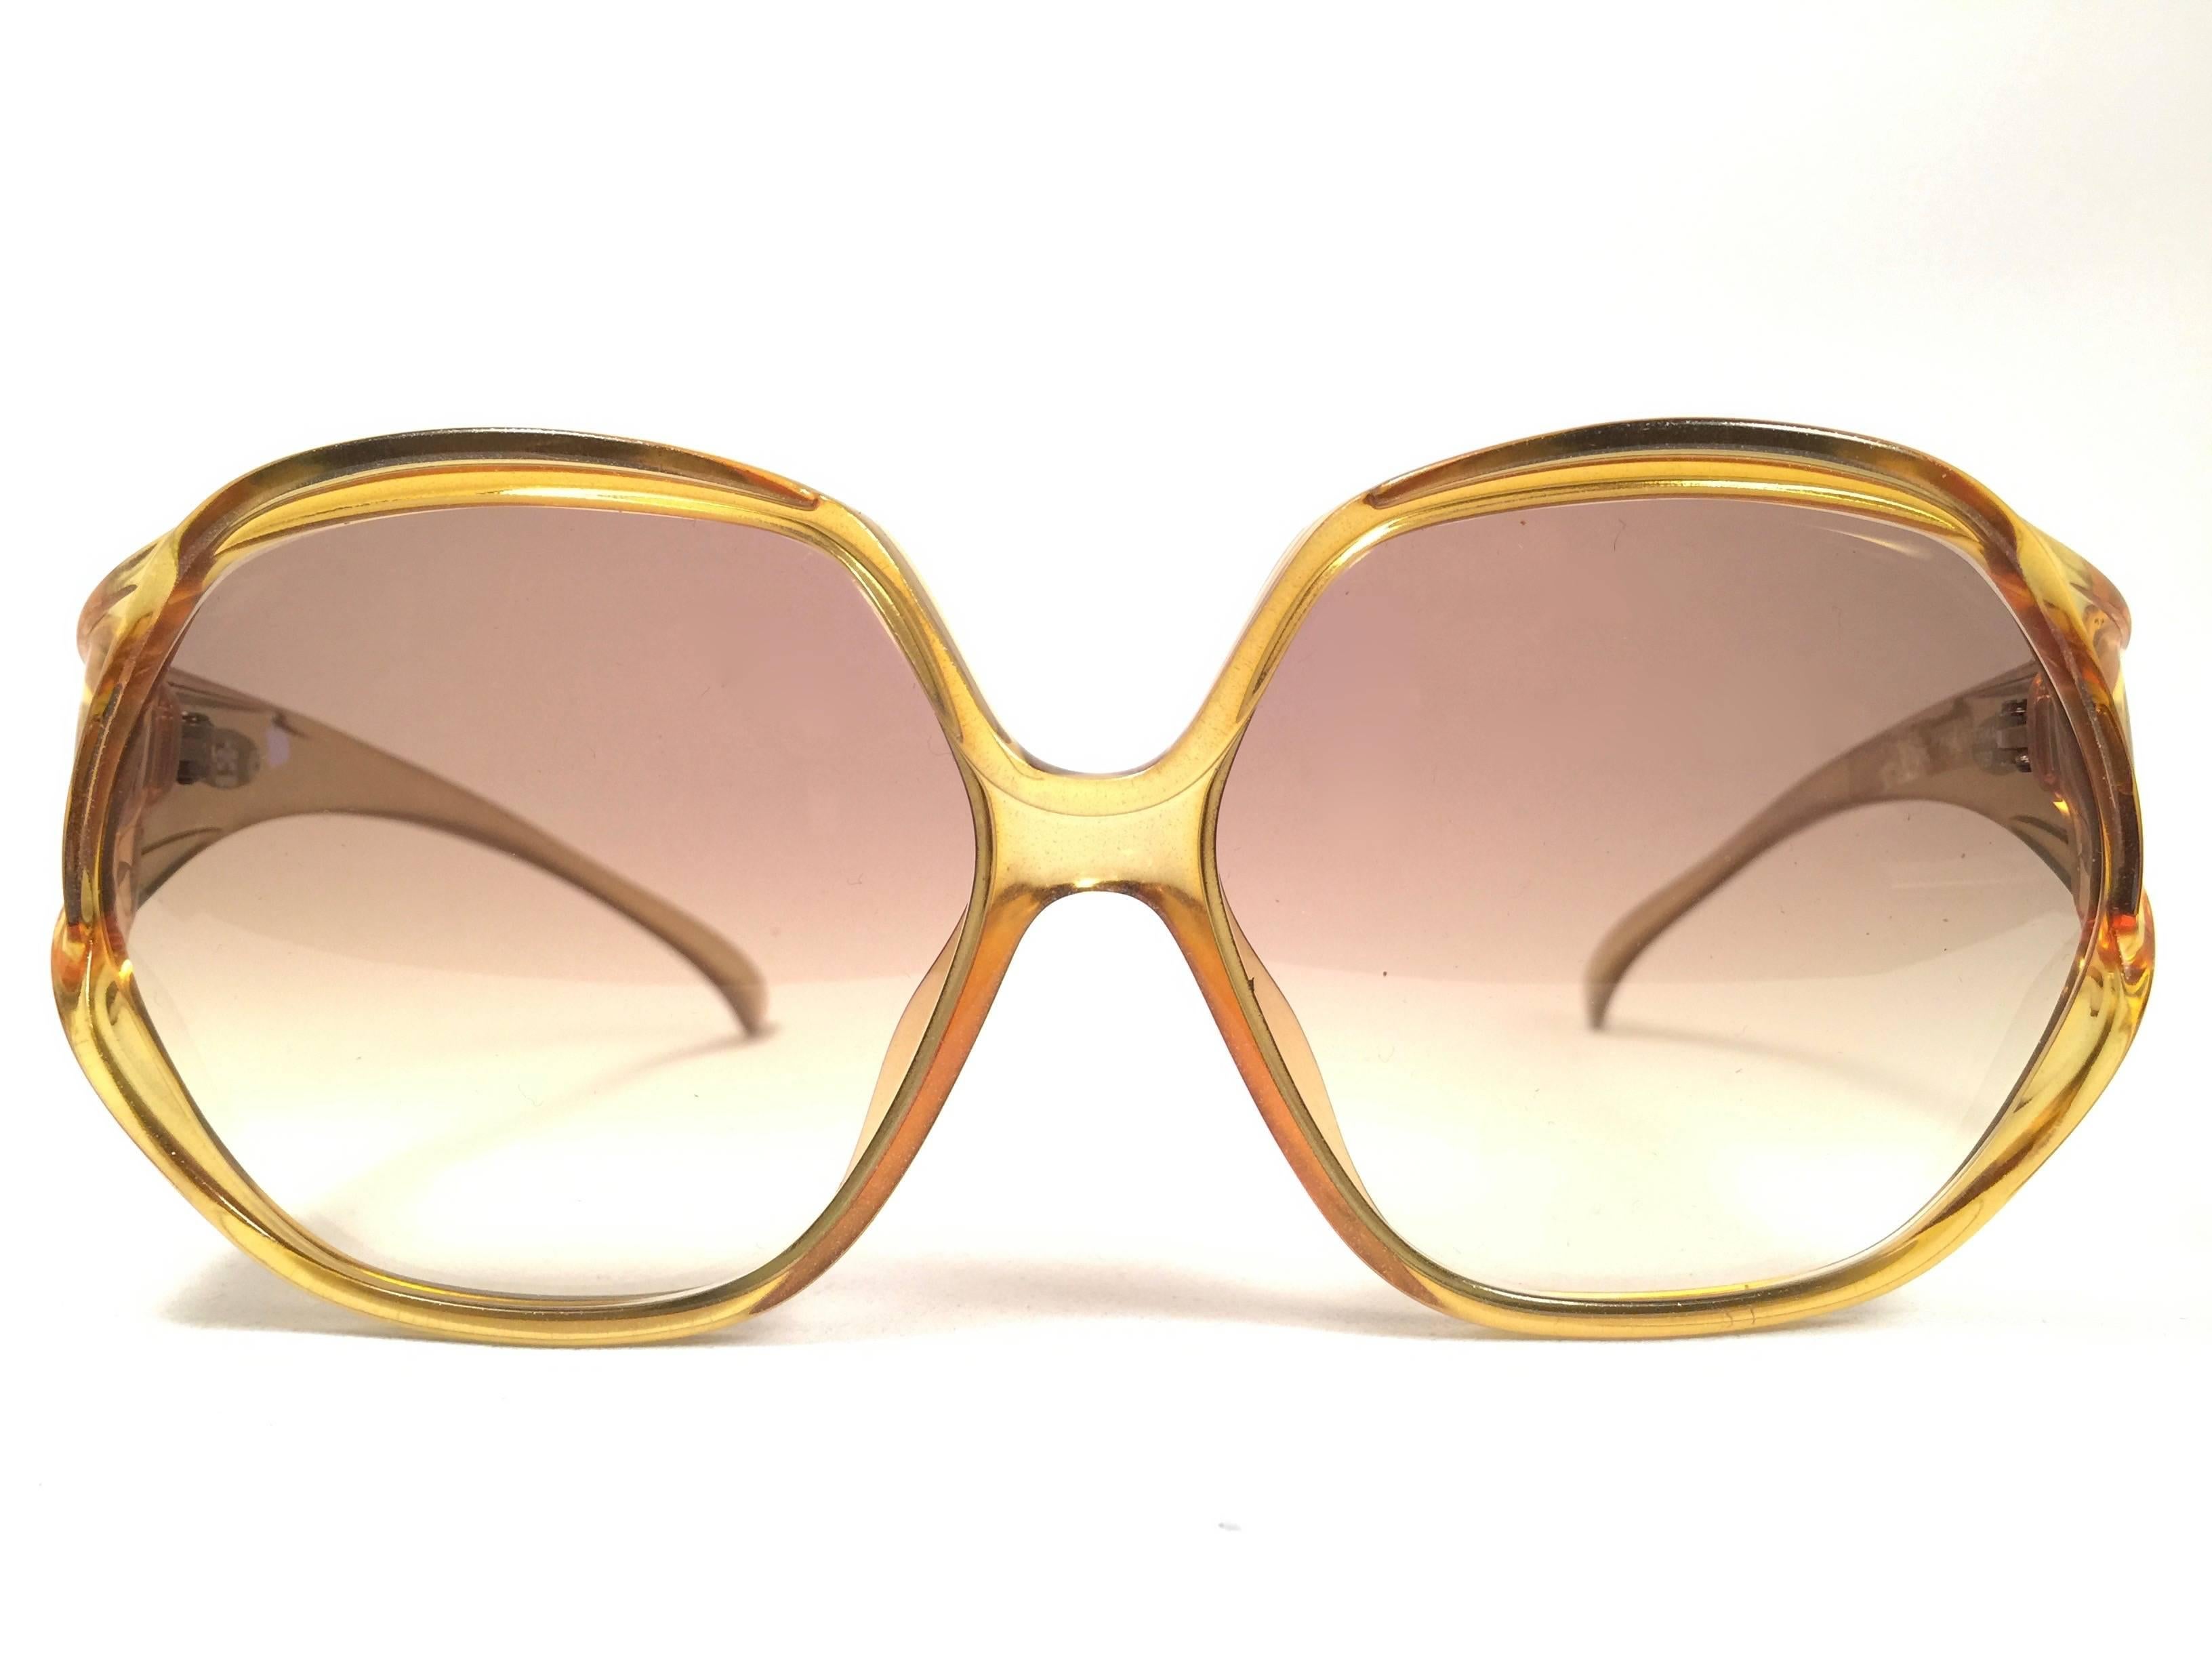 Mint Vintage Christian Dior 2097 50 Oversized amber translucent 1980's frame with spotless lenses.   
Made in Germany.  

Comes with its original silver Christian Dior Lunettes sleeve.